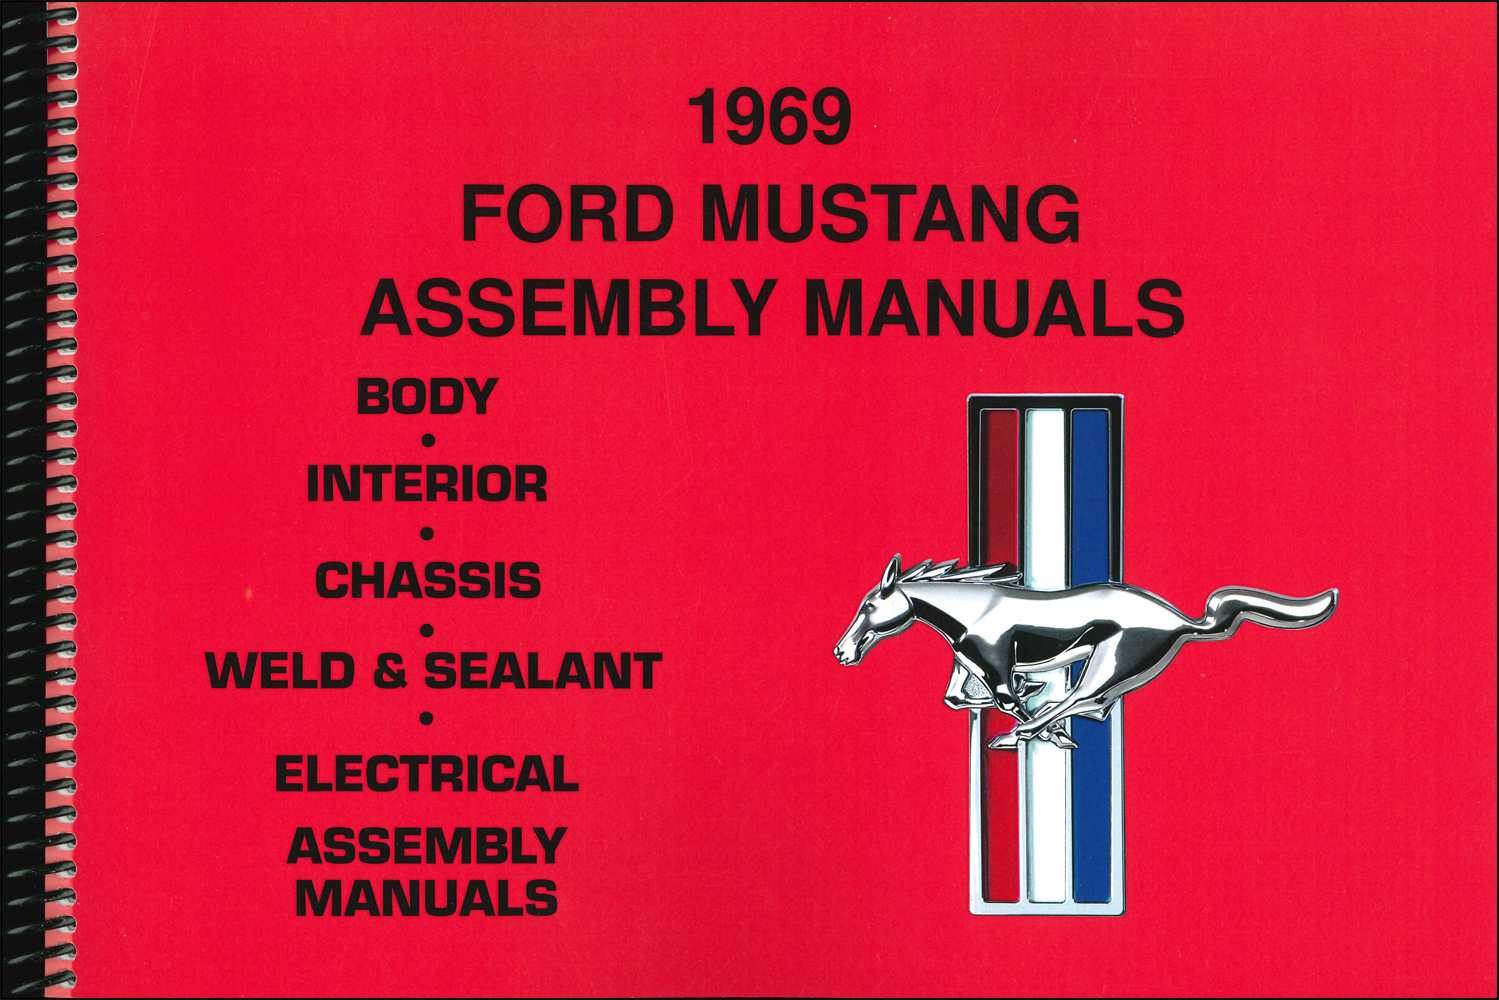 1969 Ford Mustang Assembly Manual Reprint set of 5 Books in 1 Volume